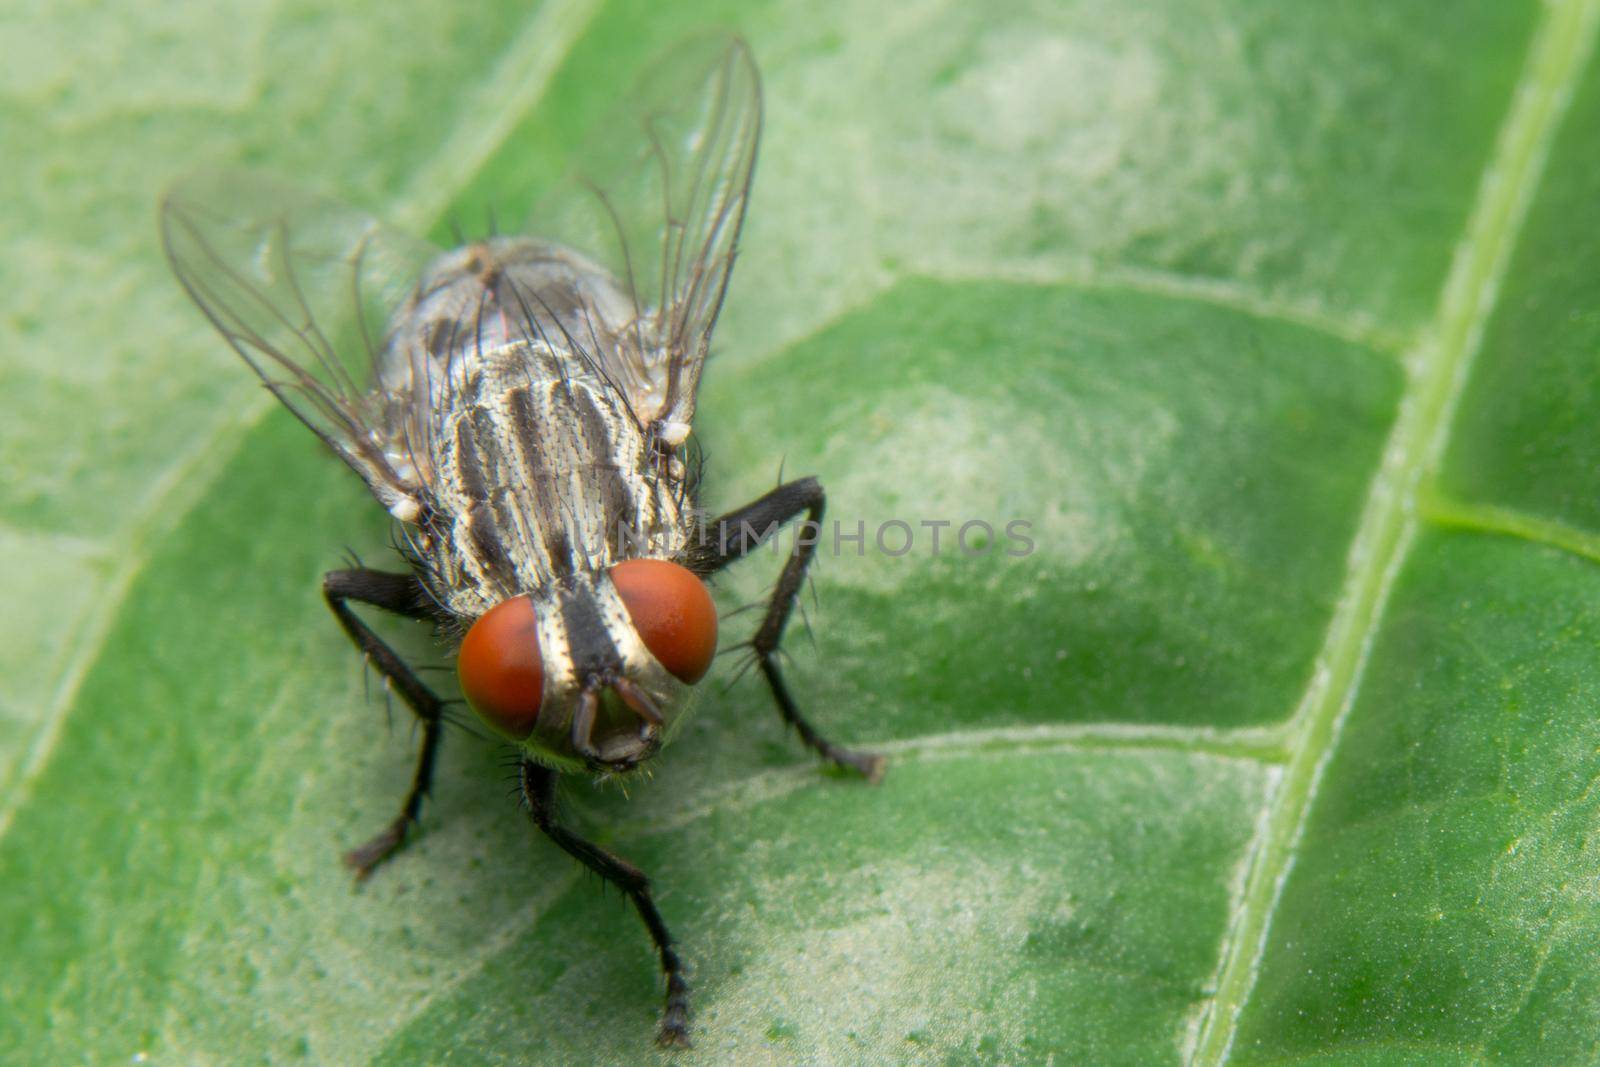 Close-up photo of a fly on a leaf